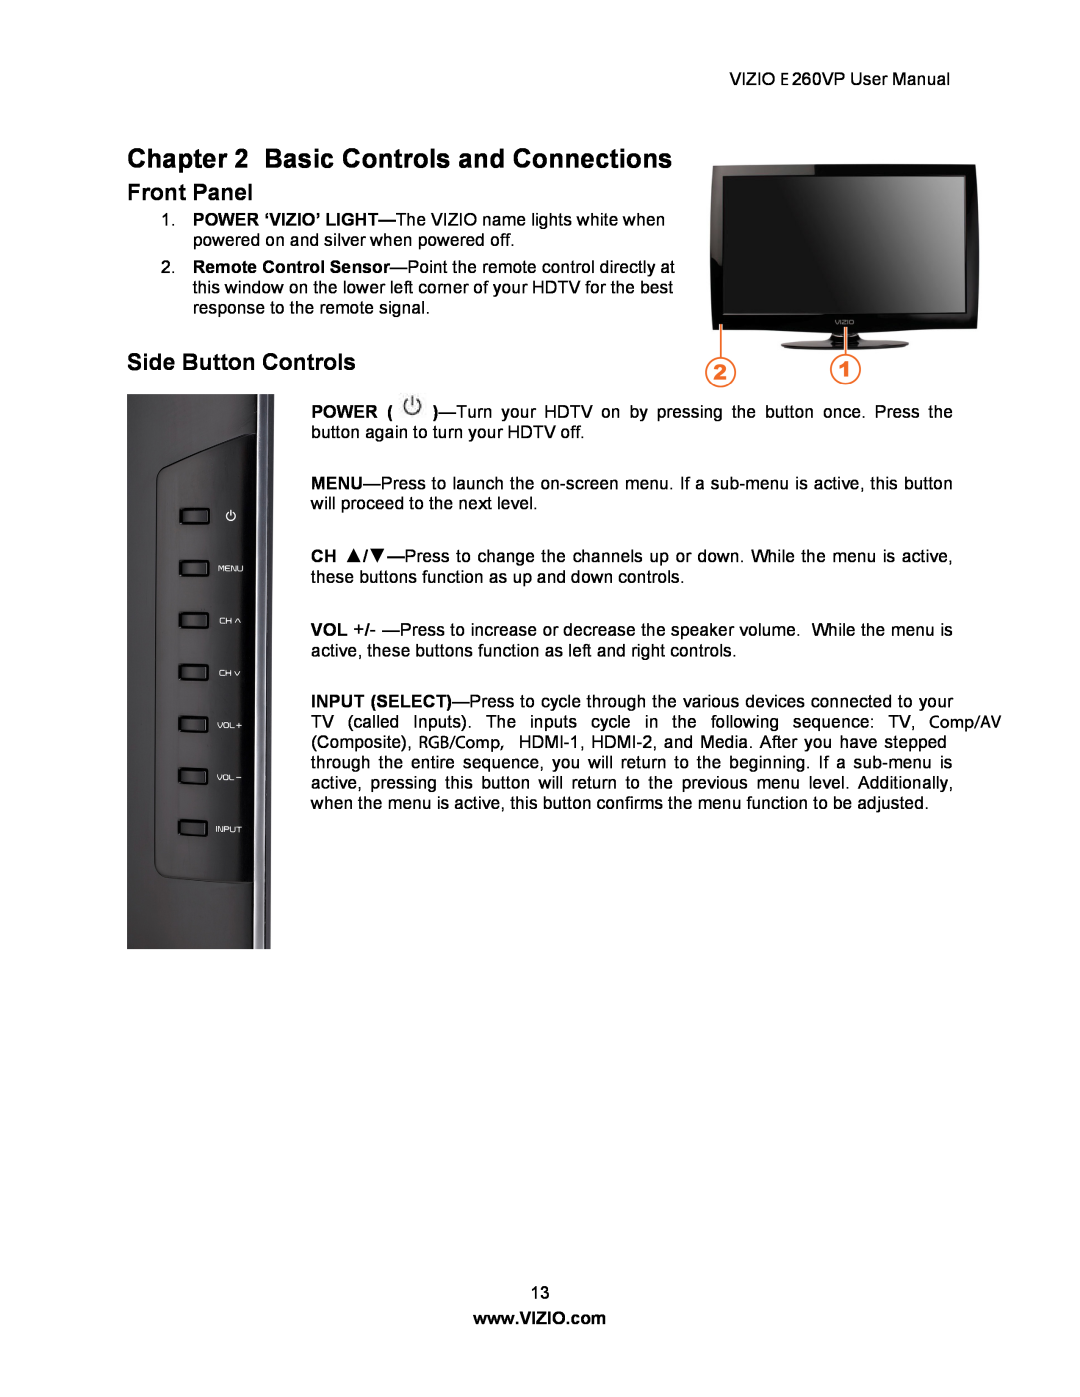 Vizio E260VP user manual Basic Controls and Connections, Front Panel, Side Button Controls 